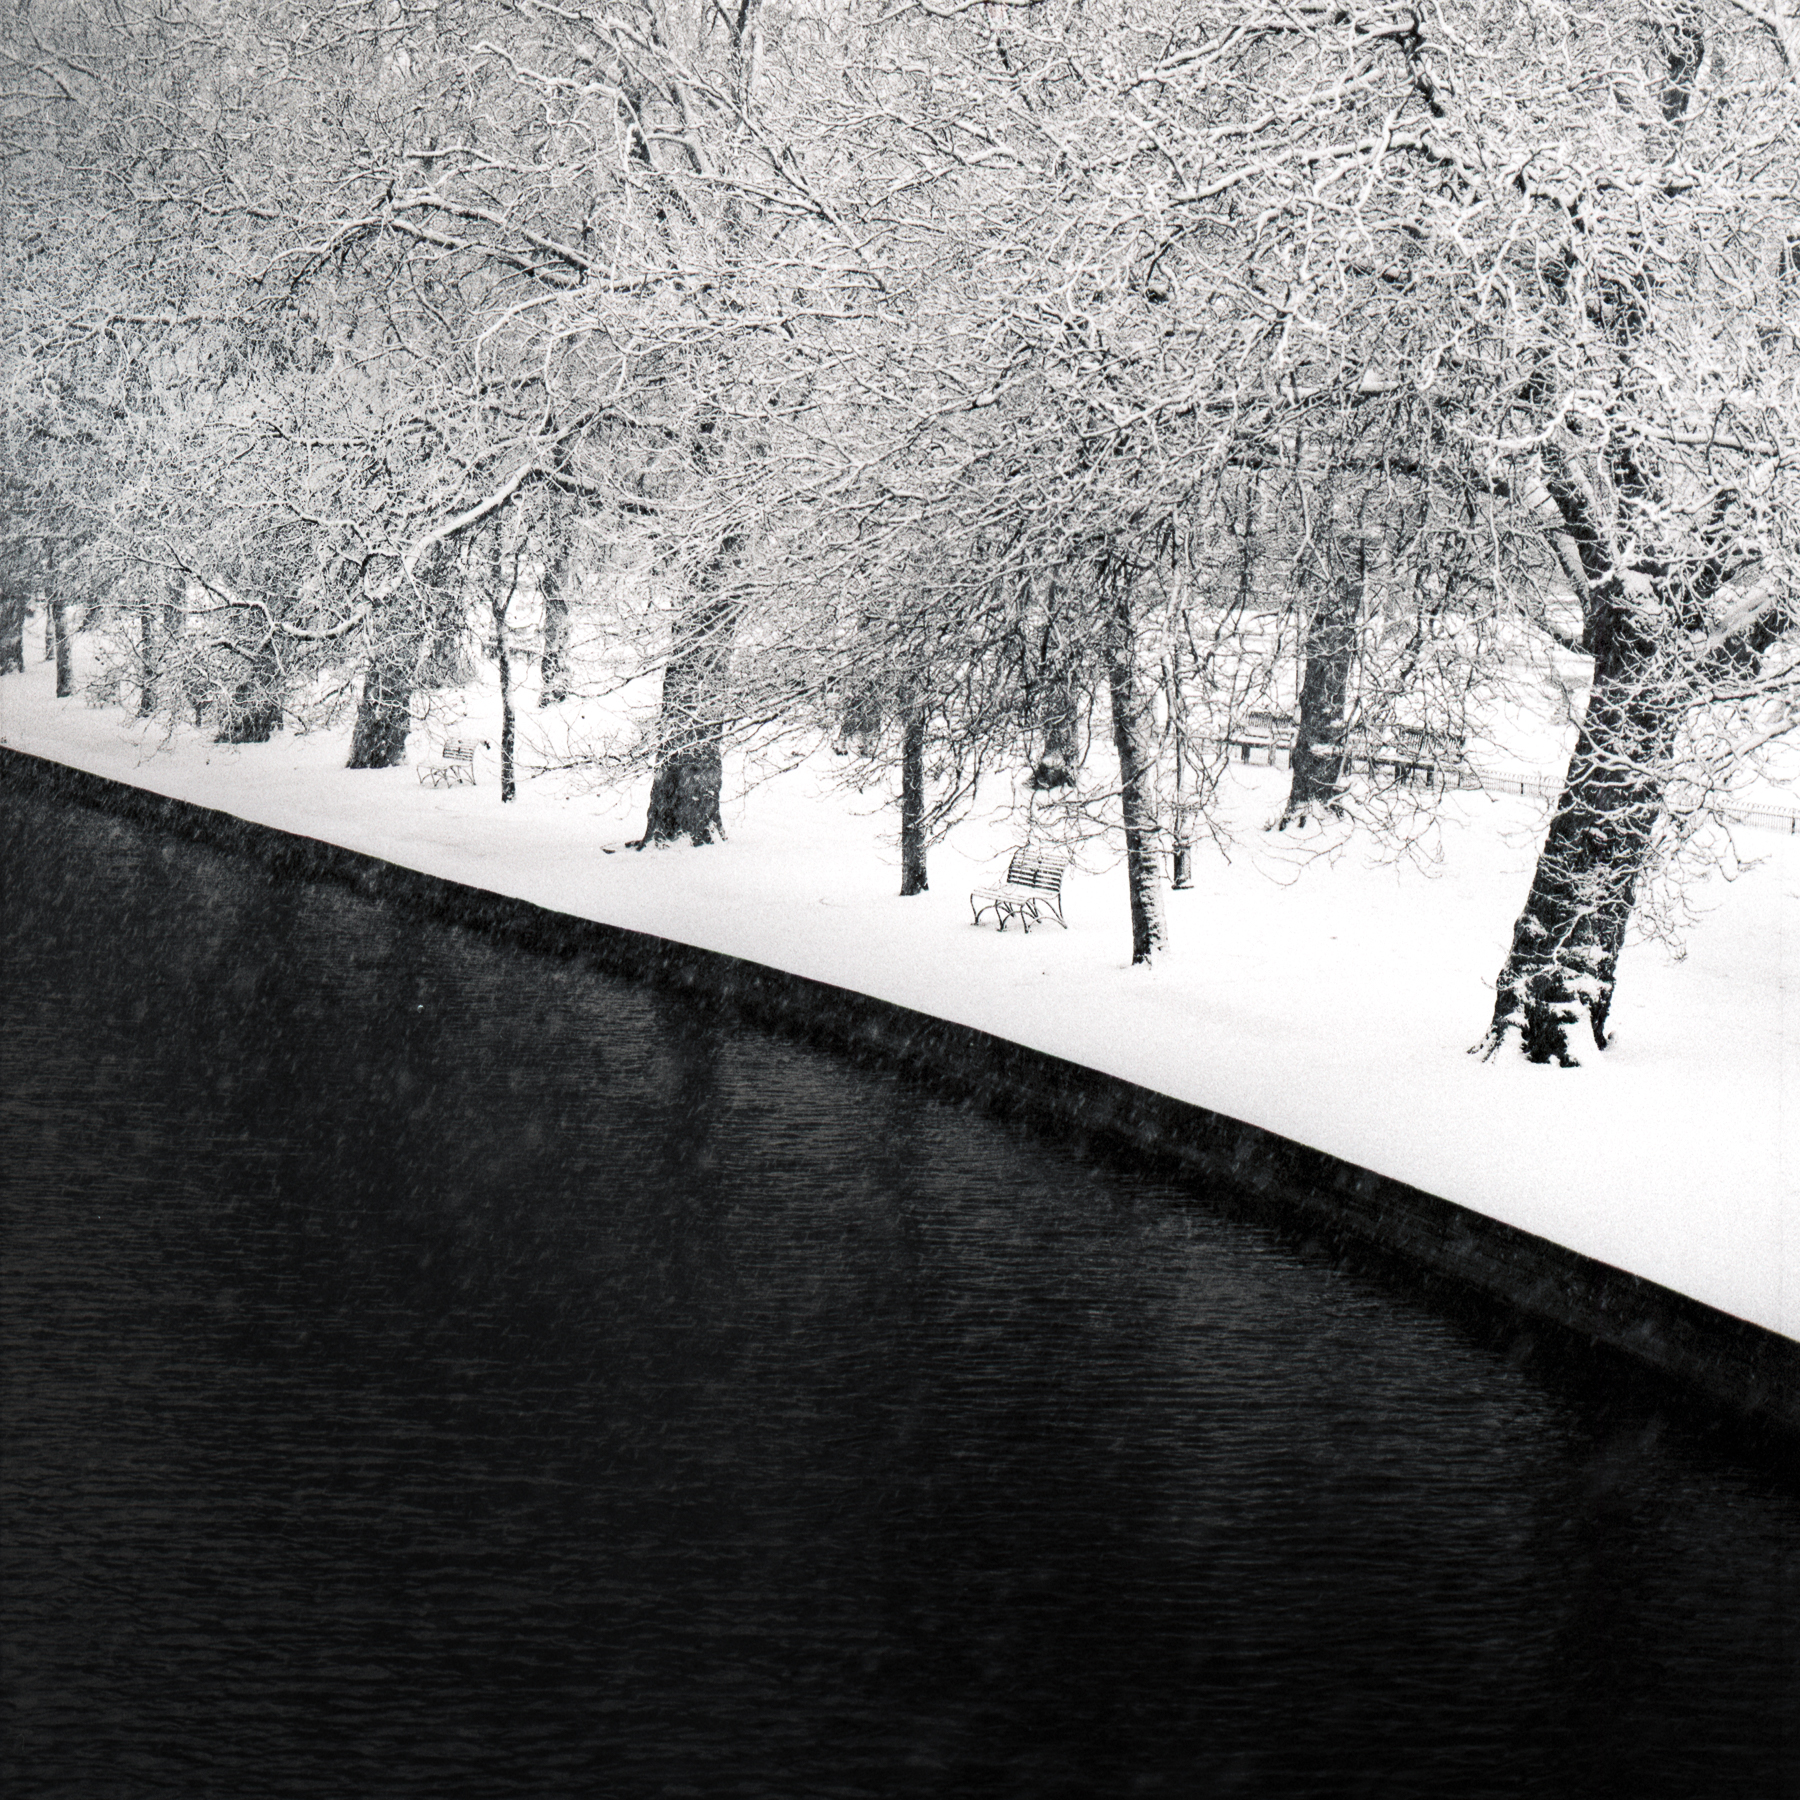 Darren Rose | Winter on The River Ouse | Hasselblad 500 C/M